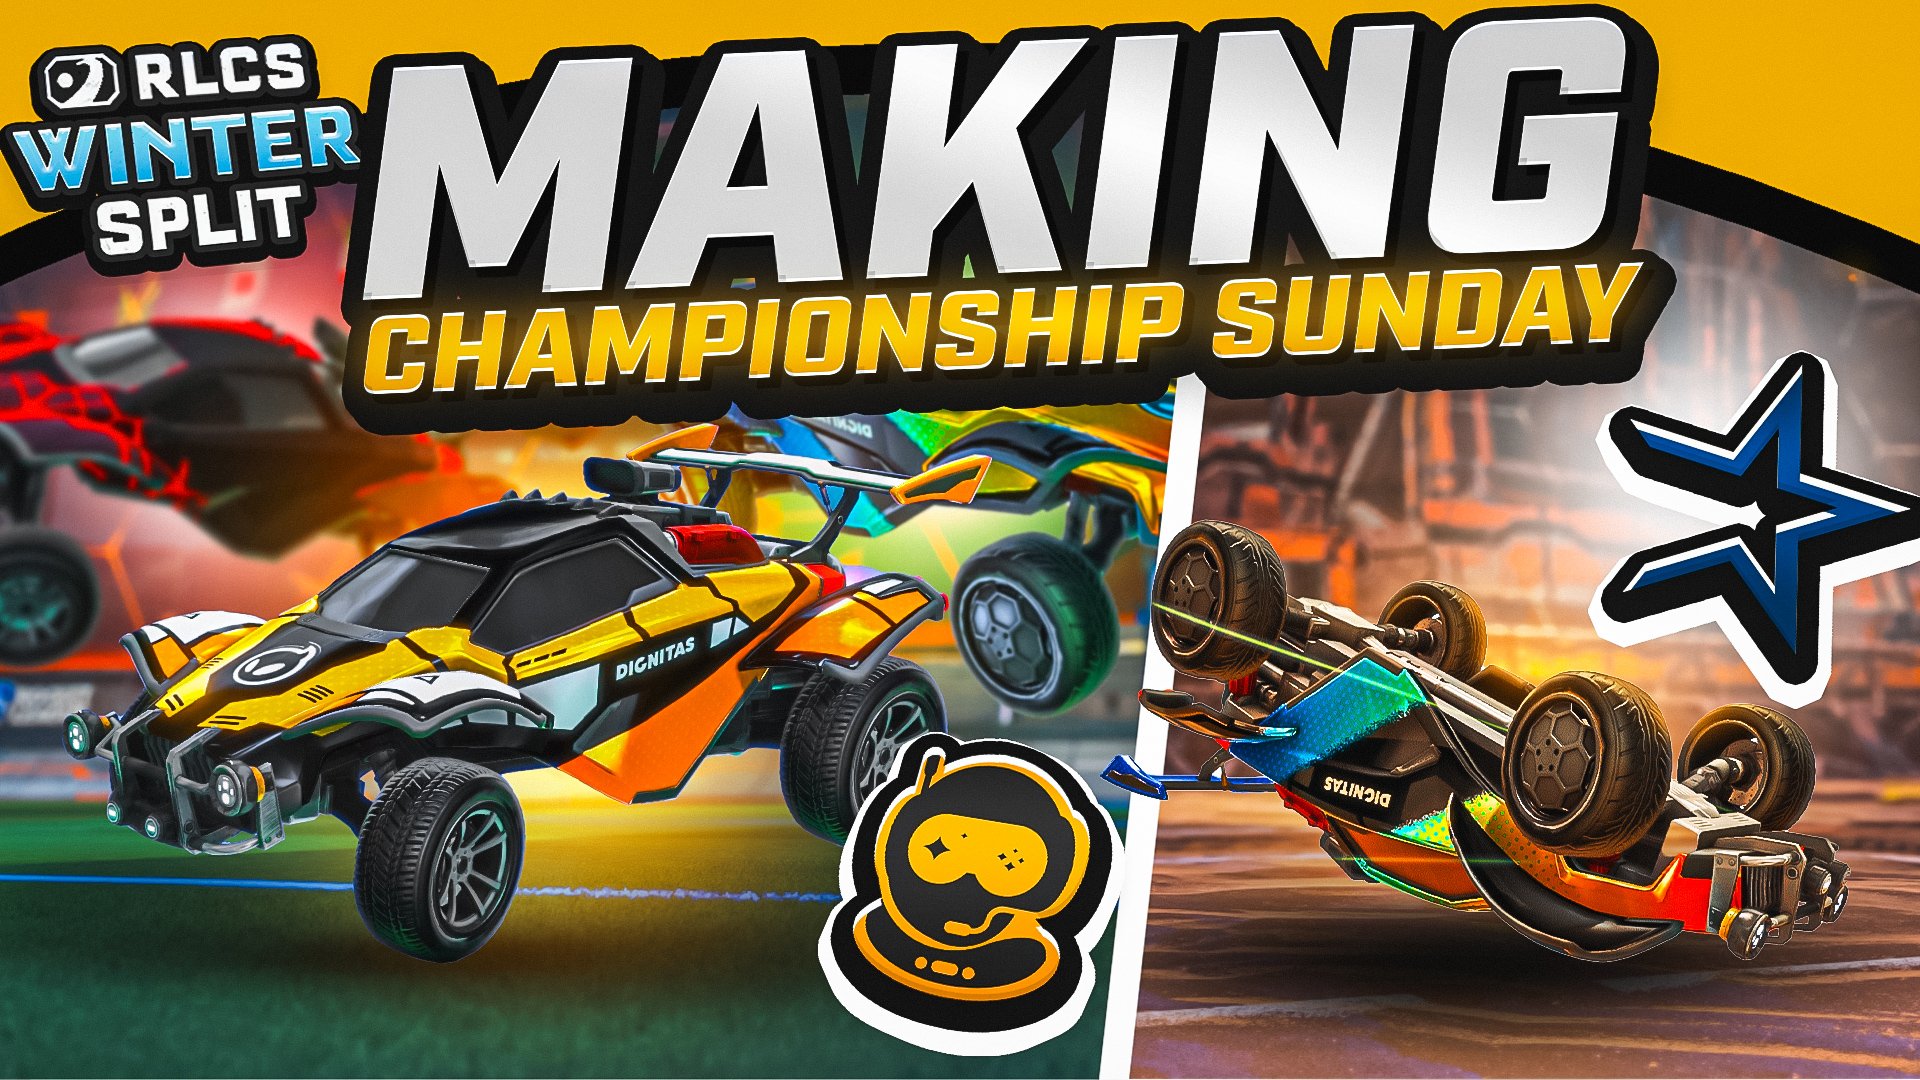 Dignitas Rocket League on Twitter: "Stay locked in on the action this weekend with RLCS highlights from Championship Sunday! Video now 😁🚨 https://t.co/VolOKZxRjK" Twitter